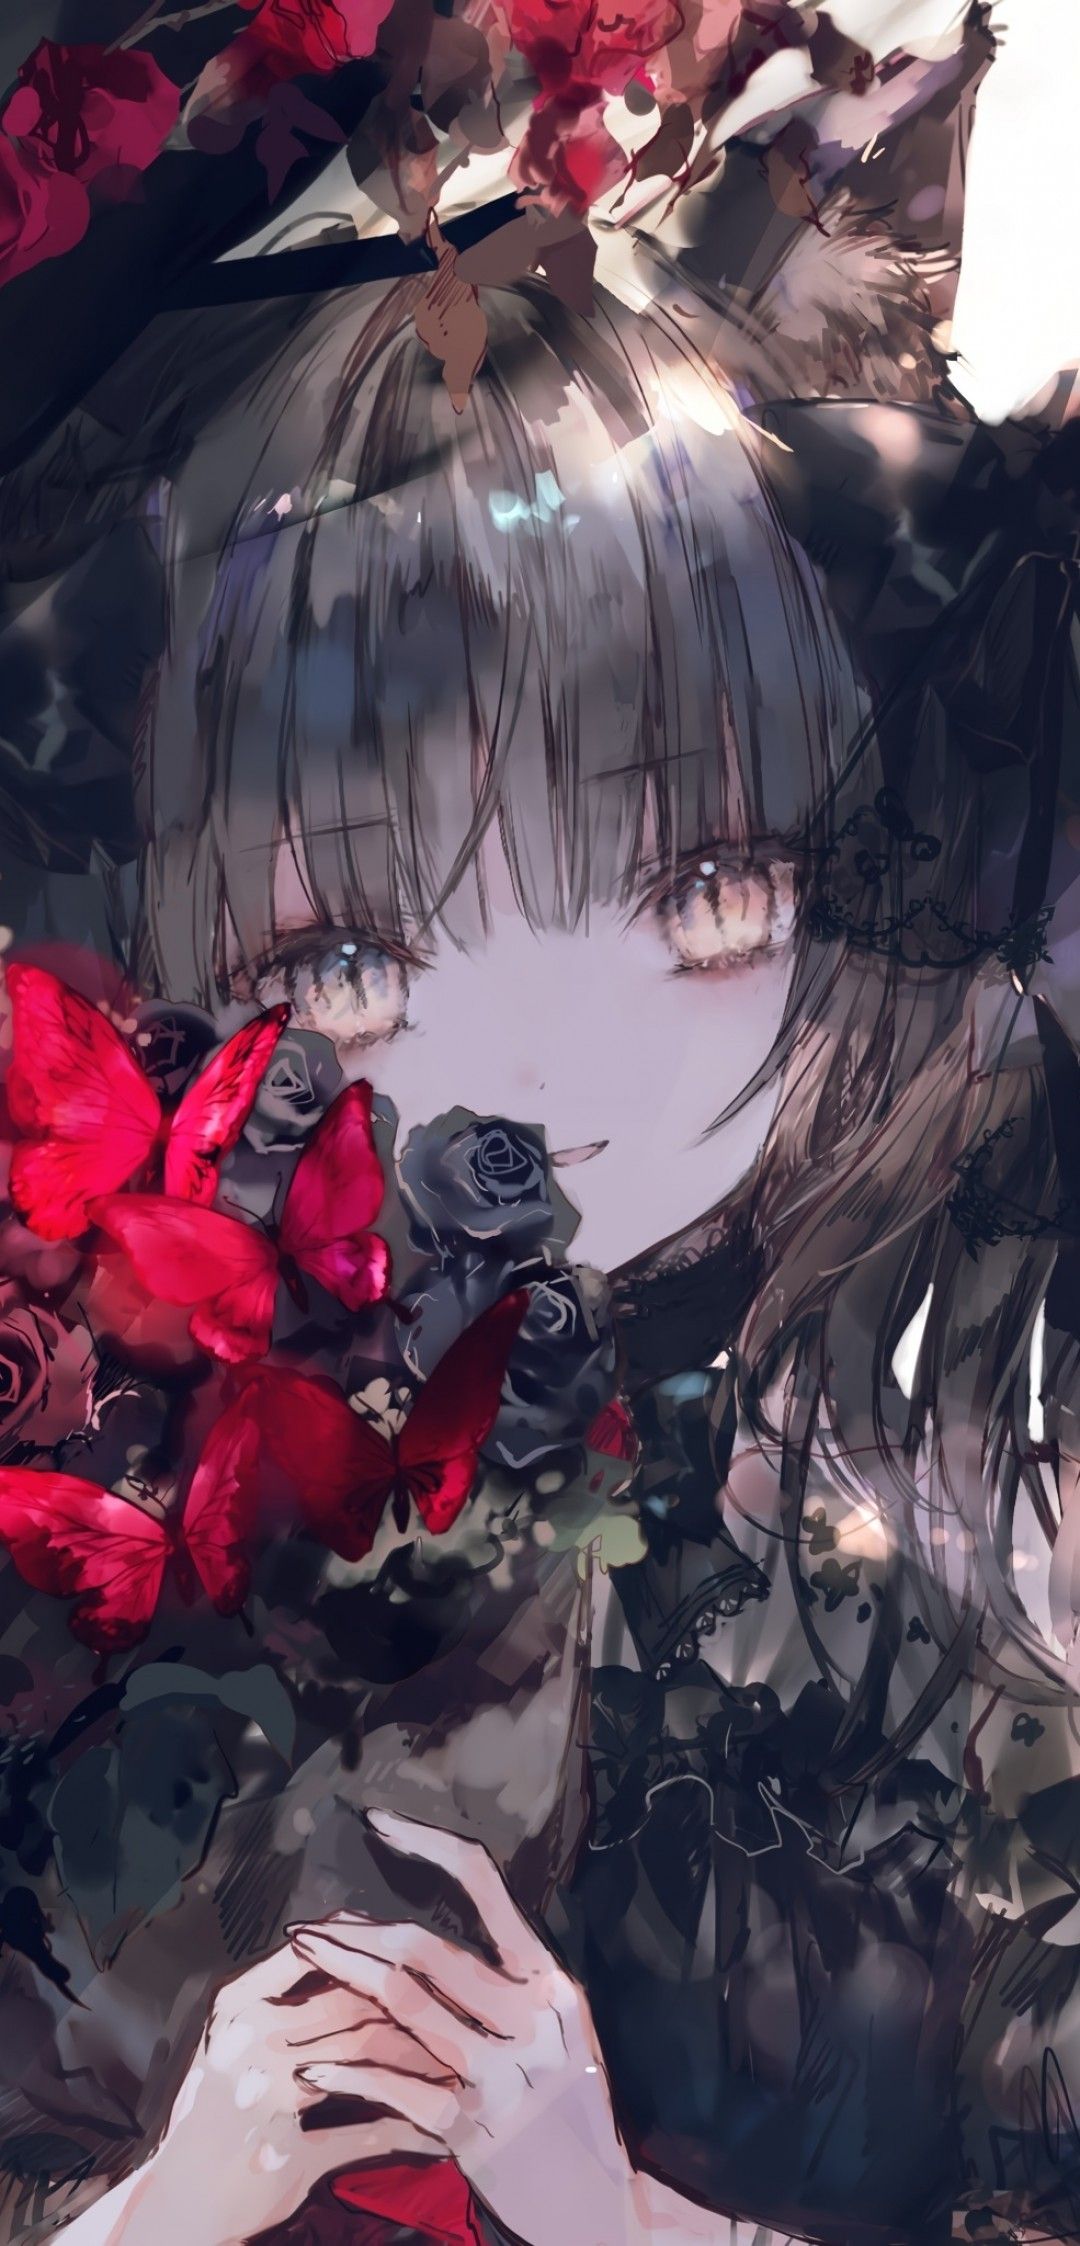 Download 1080x2246 Gothic Anime Girl, Darkness, Lolita, Red